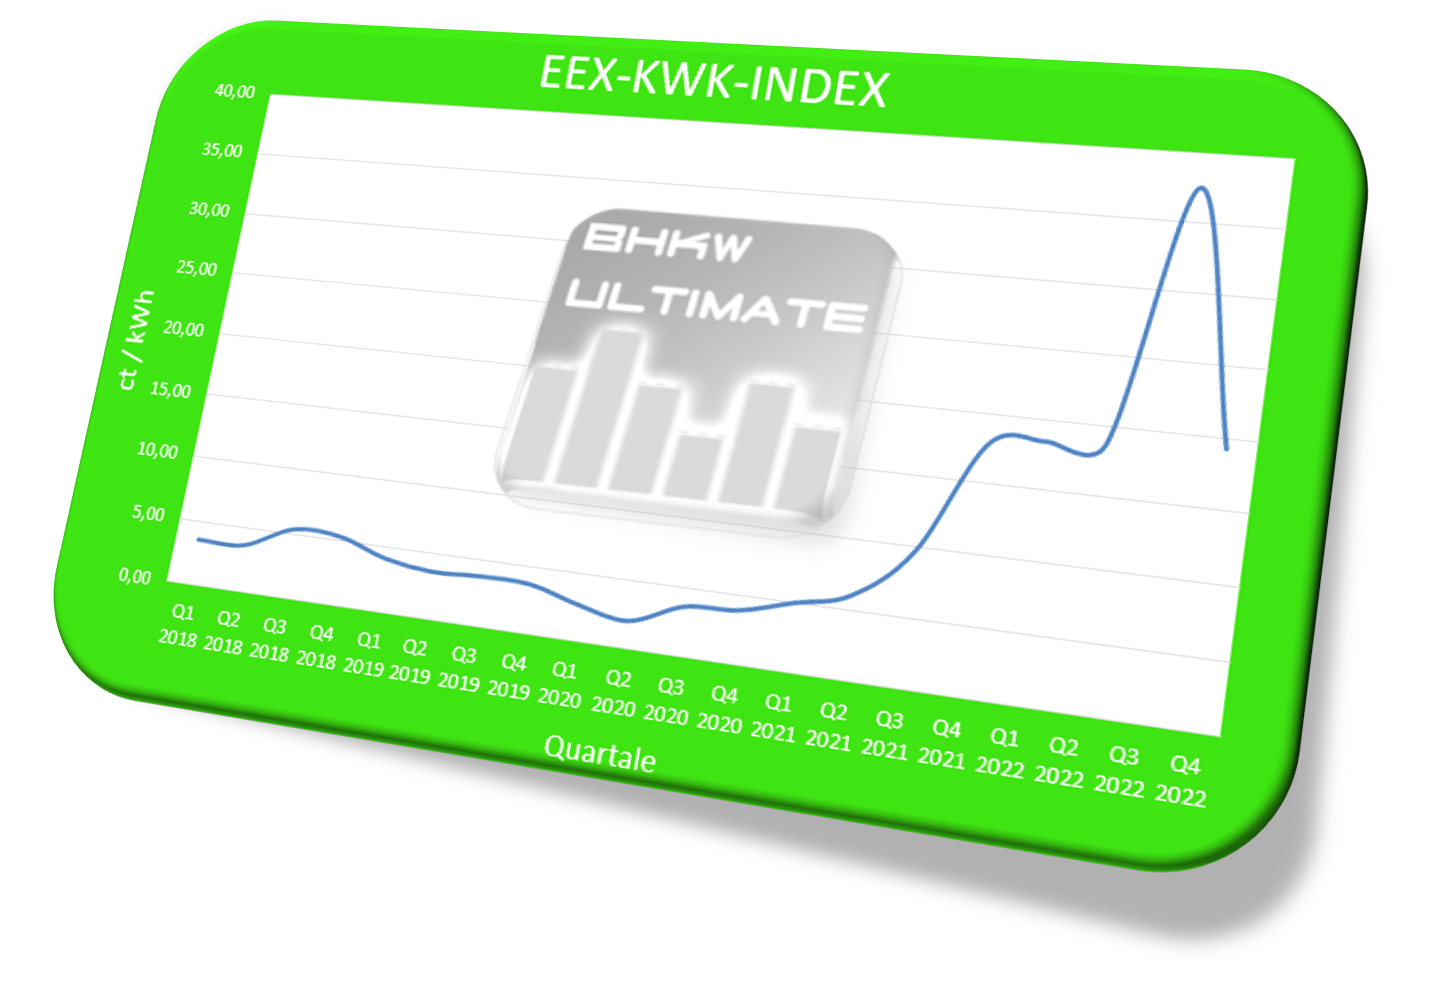 You are currently viewing BHKW-Ultimate Handlungsempfehlung bzgl. EEX-KWK-Index